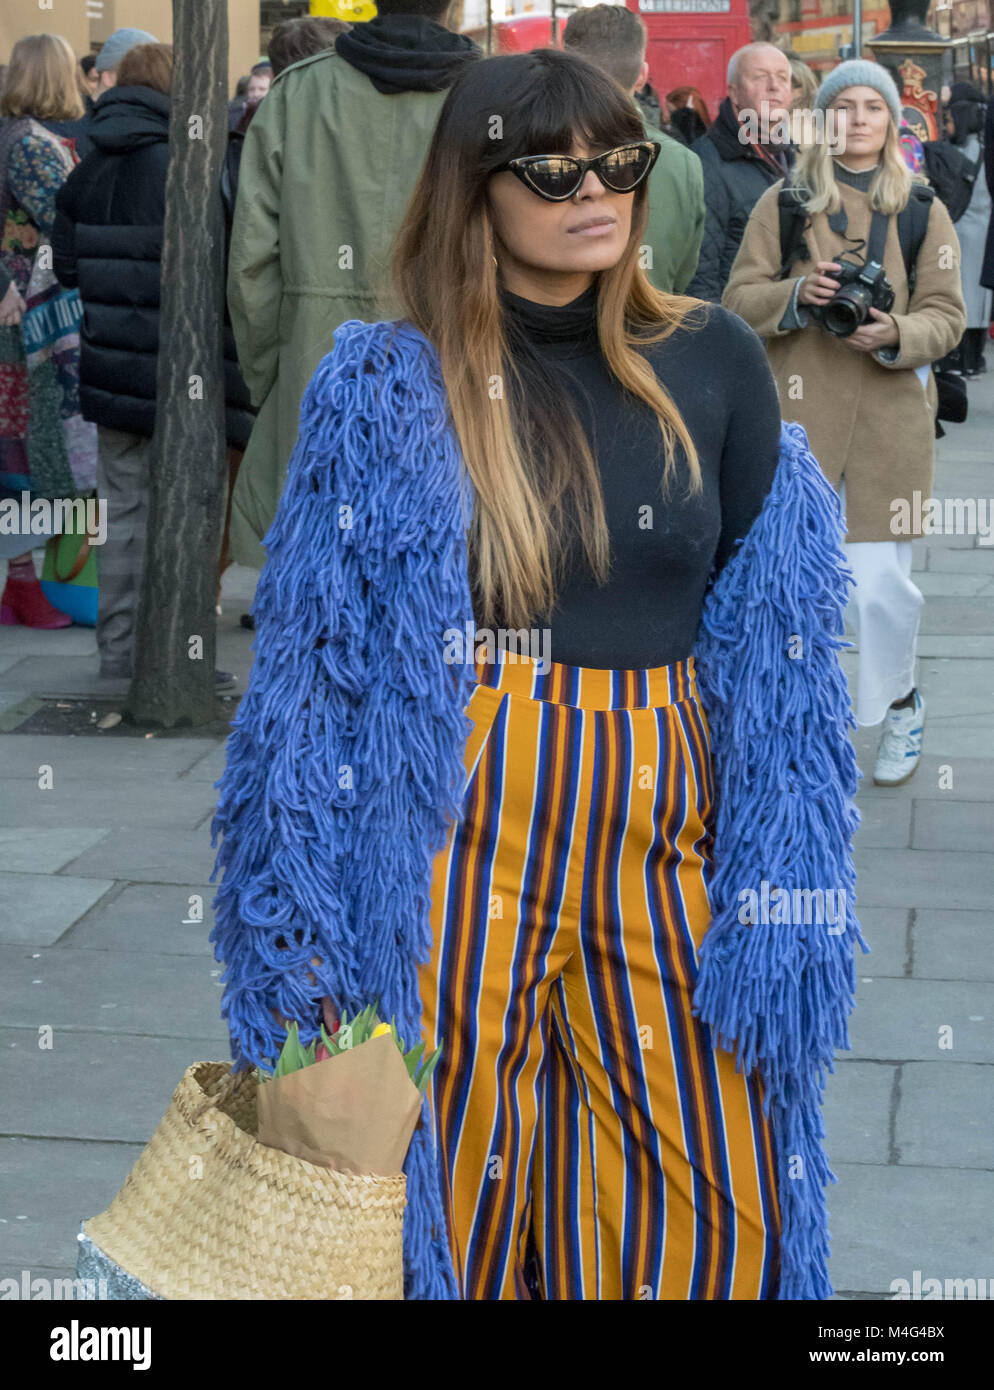 London 16th February 2018, Fashionista outside London Fashion Week venues. These are fashion following individuals who are showing off their fashion designs Credit: Ian Davidson/Alamy Live News Stock Photo